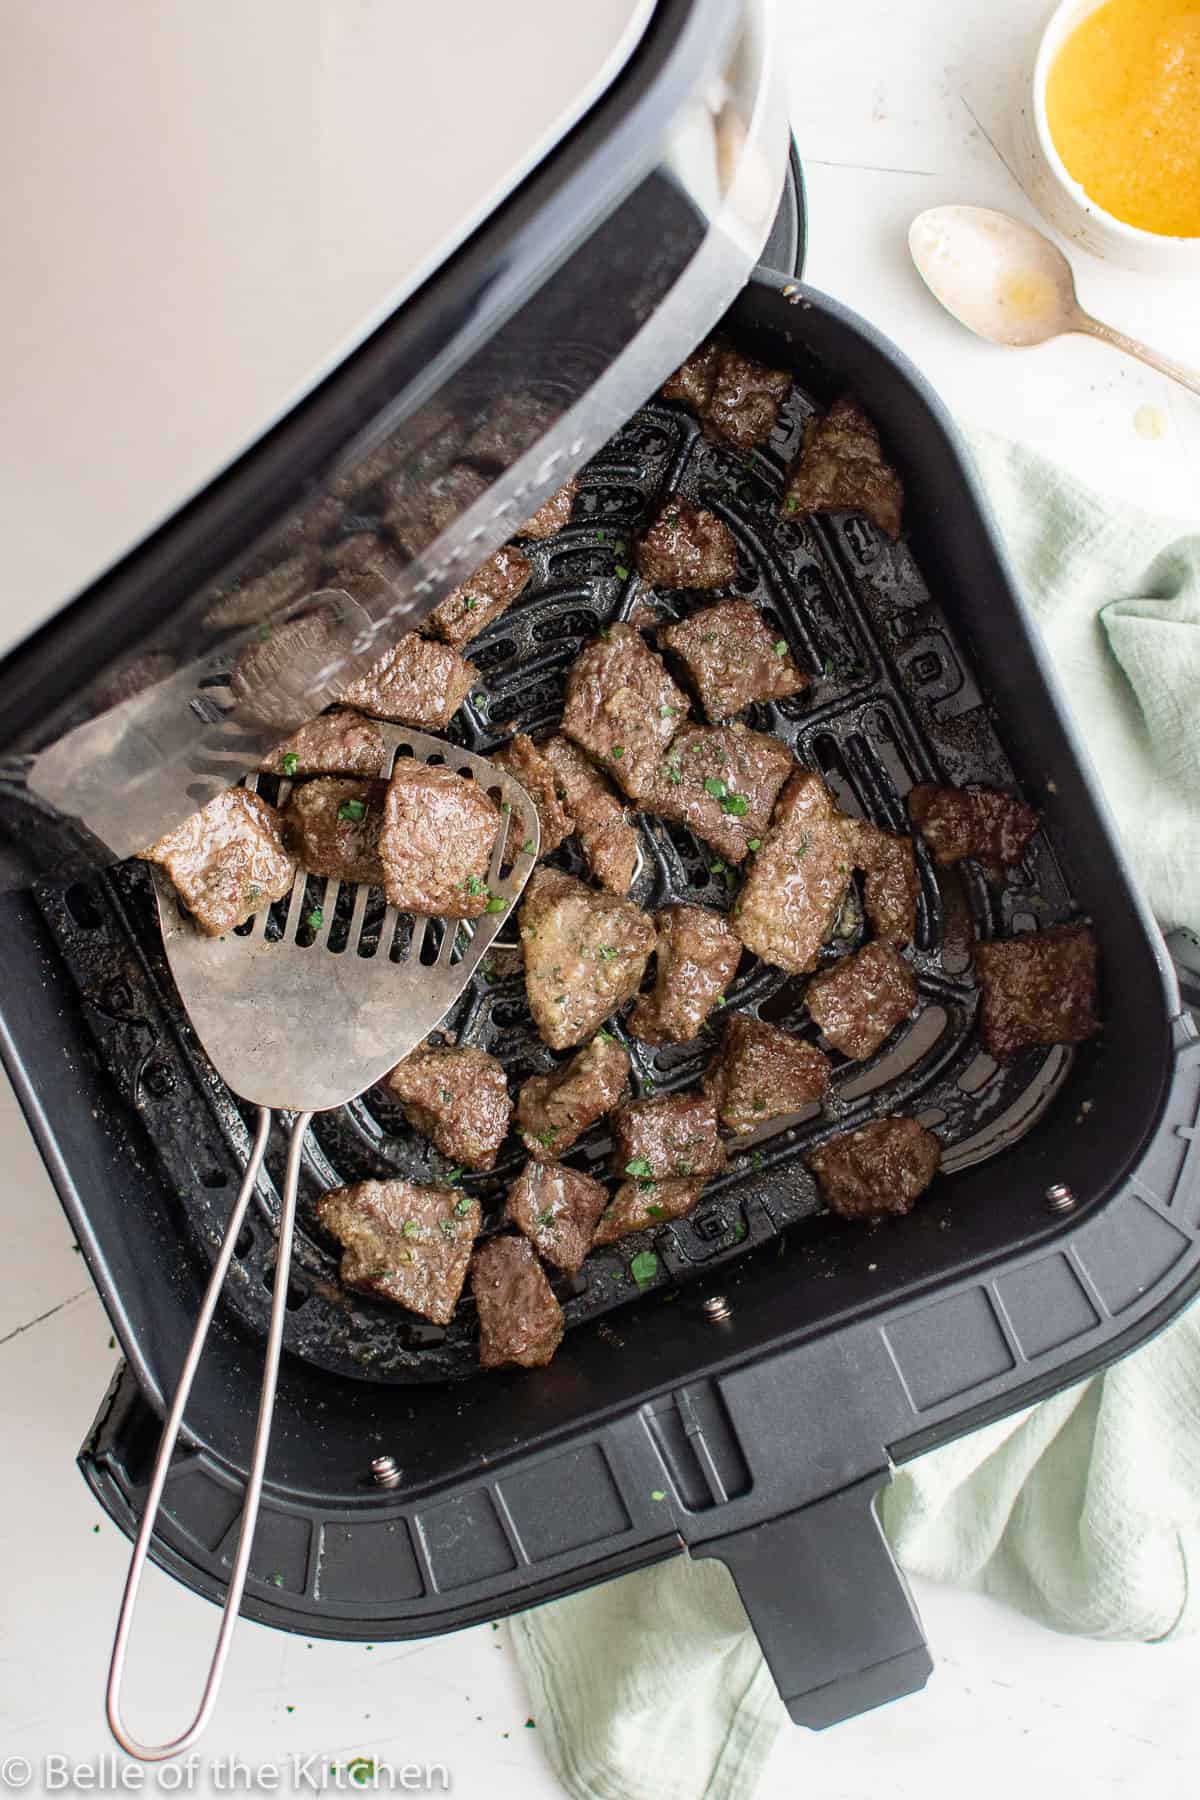 an air fryer basked filled with pieces of steak